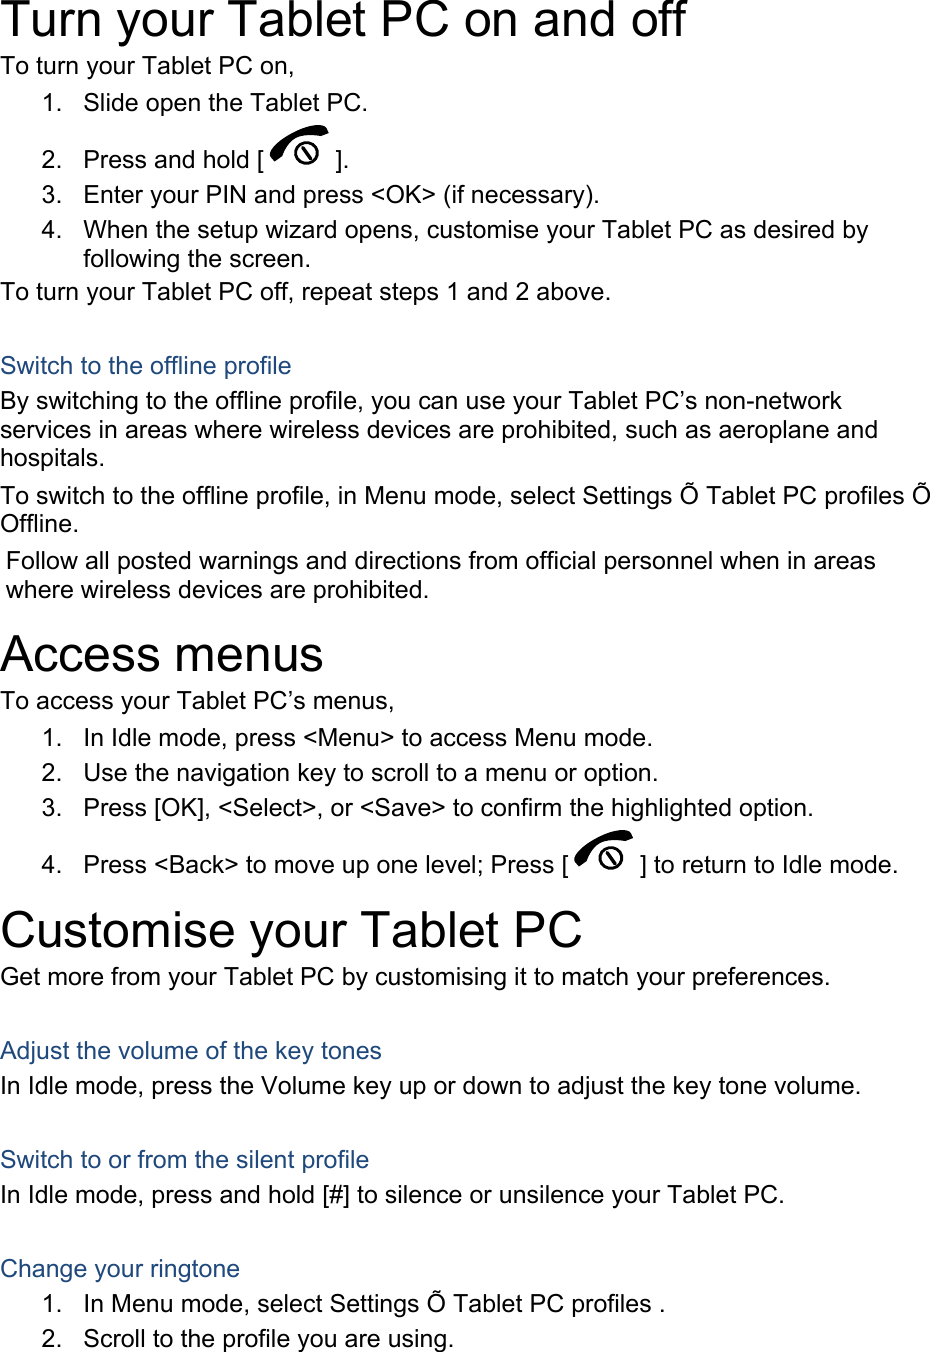  Turn your Tablet PC on and off To turn your Tablet PC on, 1.  Slide open the Tablet PC. 2.  Press and hold [ ]. 3.  Enter your PIN and press &lt;OK&gt; (if necessary). 4.  When the setup wizard opens, customise your Tablet PC as desired by following the screen. To turn your Tablet PC off, repeat steps 1 and 2 above.  Switch to the offline profile By switching to the offline profile, you can use your Tablet PC’s non-network services in areas where wireless devices are prohibited, such as aeroplane and hospitals. To switch to the offline profile, in Menu mode, select Settings Õ Tablet PC profiles Õ Offline. Follow all posted warnings and directions from official personnel when in areas where wireless devices are prohibited. Access menus To access your Tablet PC’s menus, 1.  In Idle mode, press &lt;Menu&gt; to access Menu mode. 2.  Use the navigation key to scroll to a menu or option. 3.  Press [OK], &lt;Select&gt;, or &lt;Save&gt; to confirm the highlighted option. 4.  Press &lt;Back&gt; to move up one level; Press [ ] to return to Idle mode. Customise your Tablet PC Get more from your Tablet PC by customising it to match your preferences.  Adjust the volume of the key tones In Idle mode, press the Volume key up or down to adjust the key tone volume.  Switch to or from the silent profile In Idle mode, press and hold [#] to silence or unsilence your Tablet PC.  Change your ringtone 1.  In Menu mode, select Settings Õ Tablet PC profiles . 2.  Scroll to the profile you are using. 